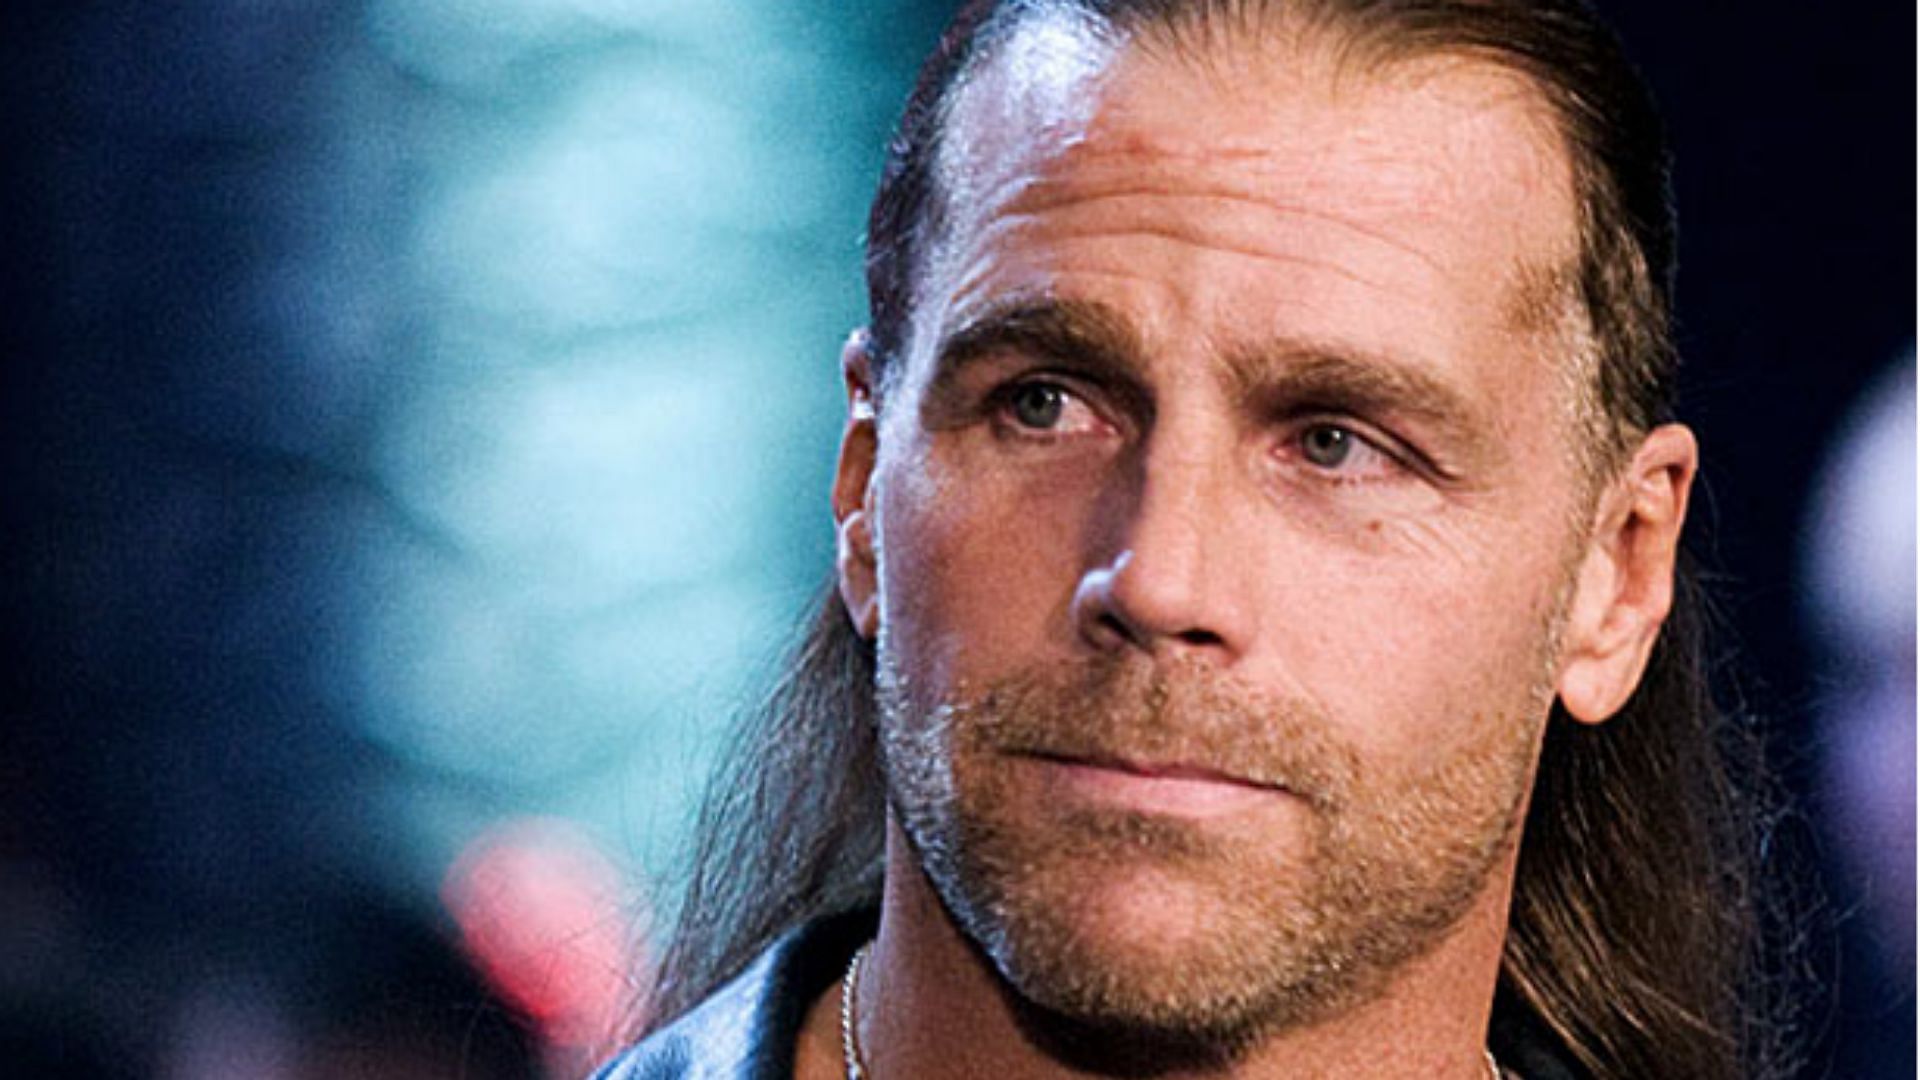 Shawn Michaels had some things to say 